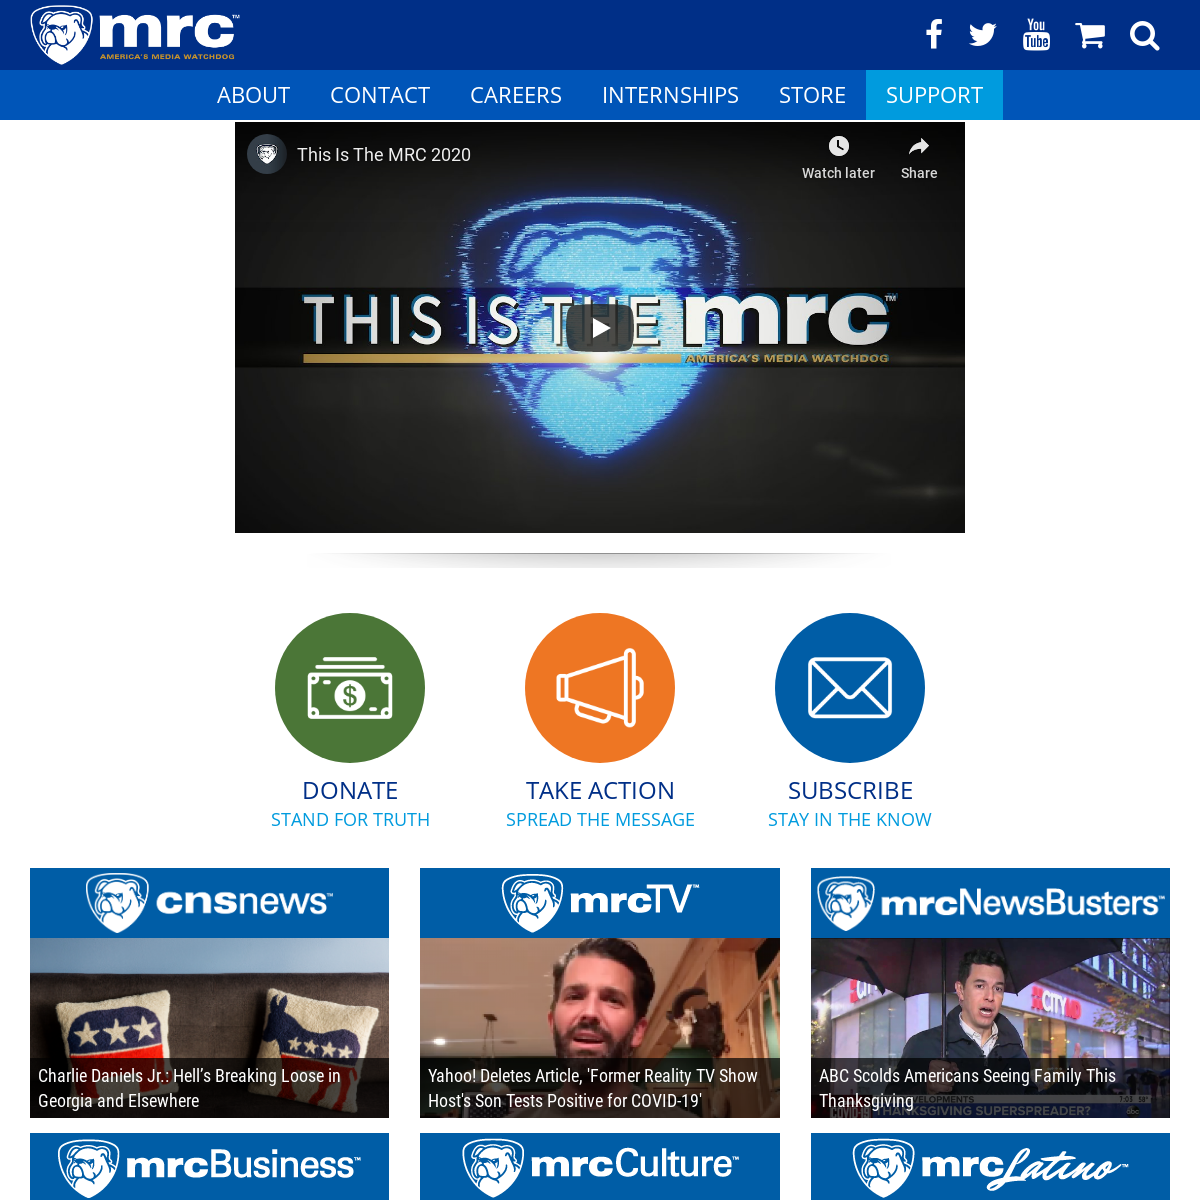 A complete backup of mrc.org